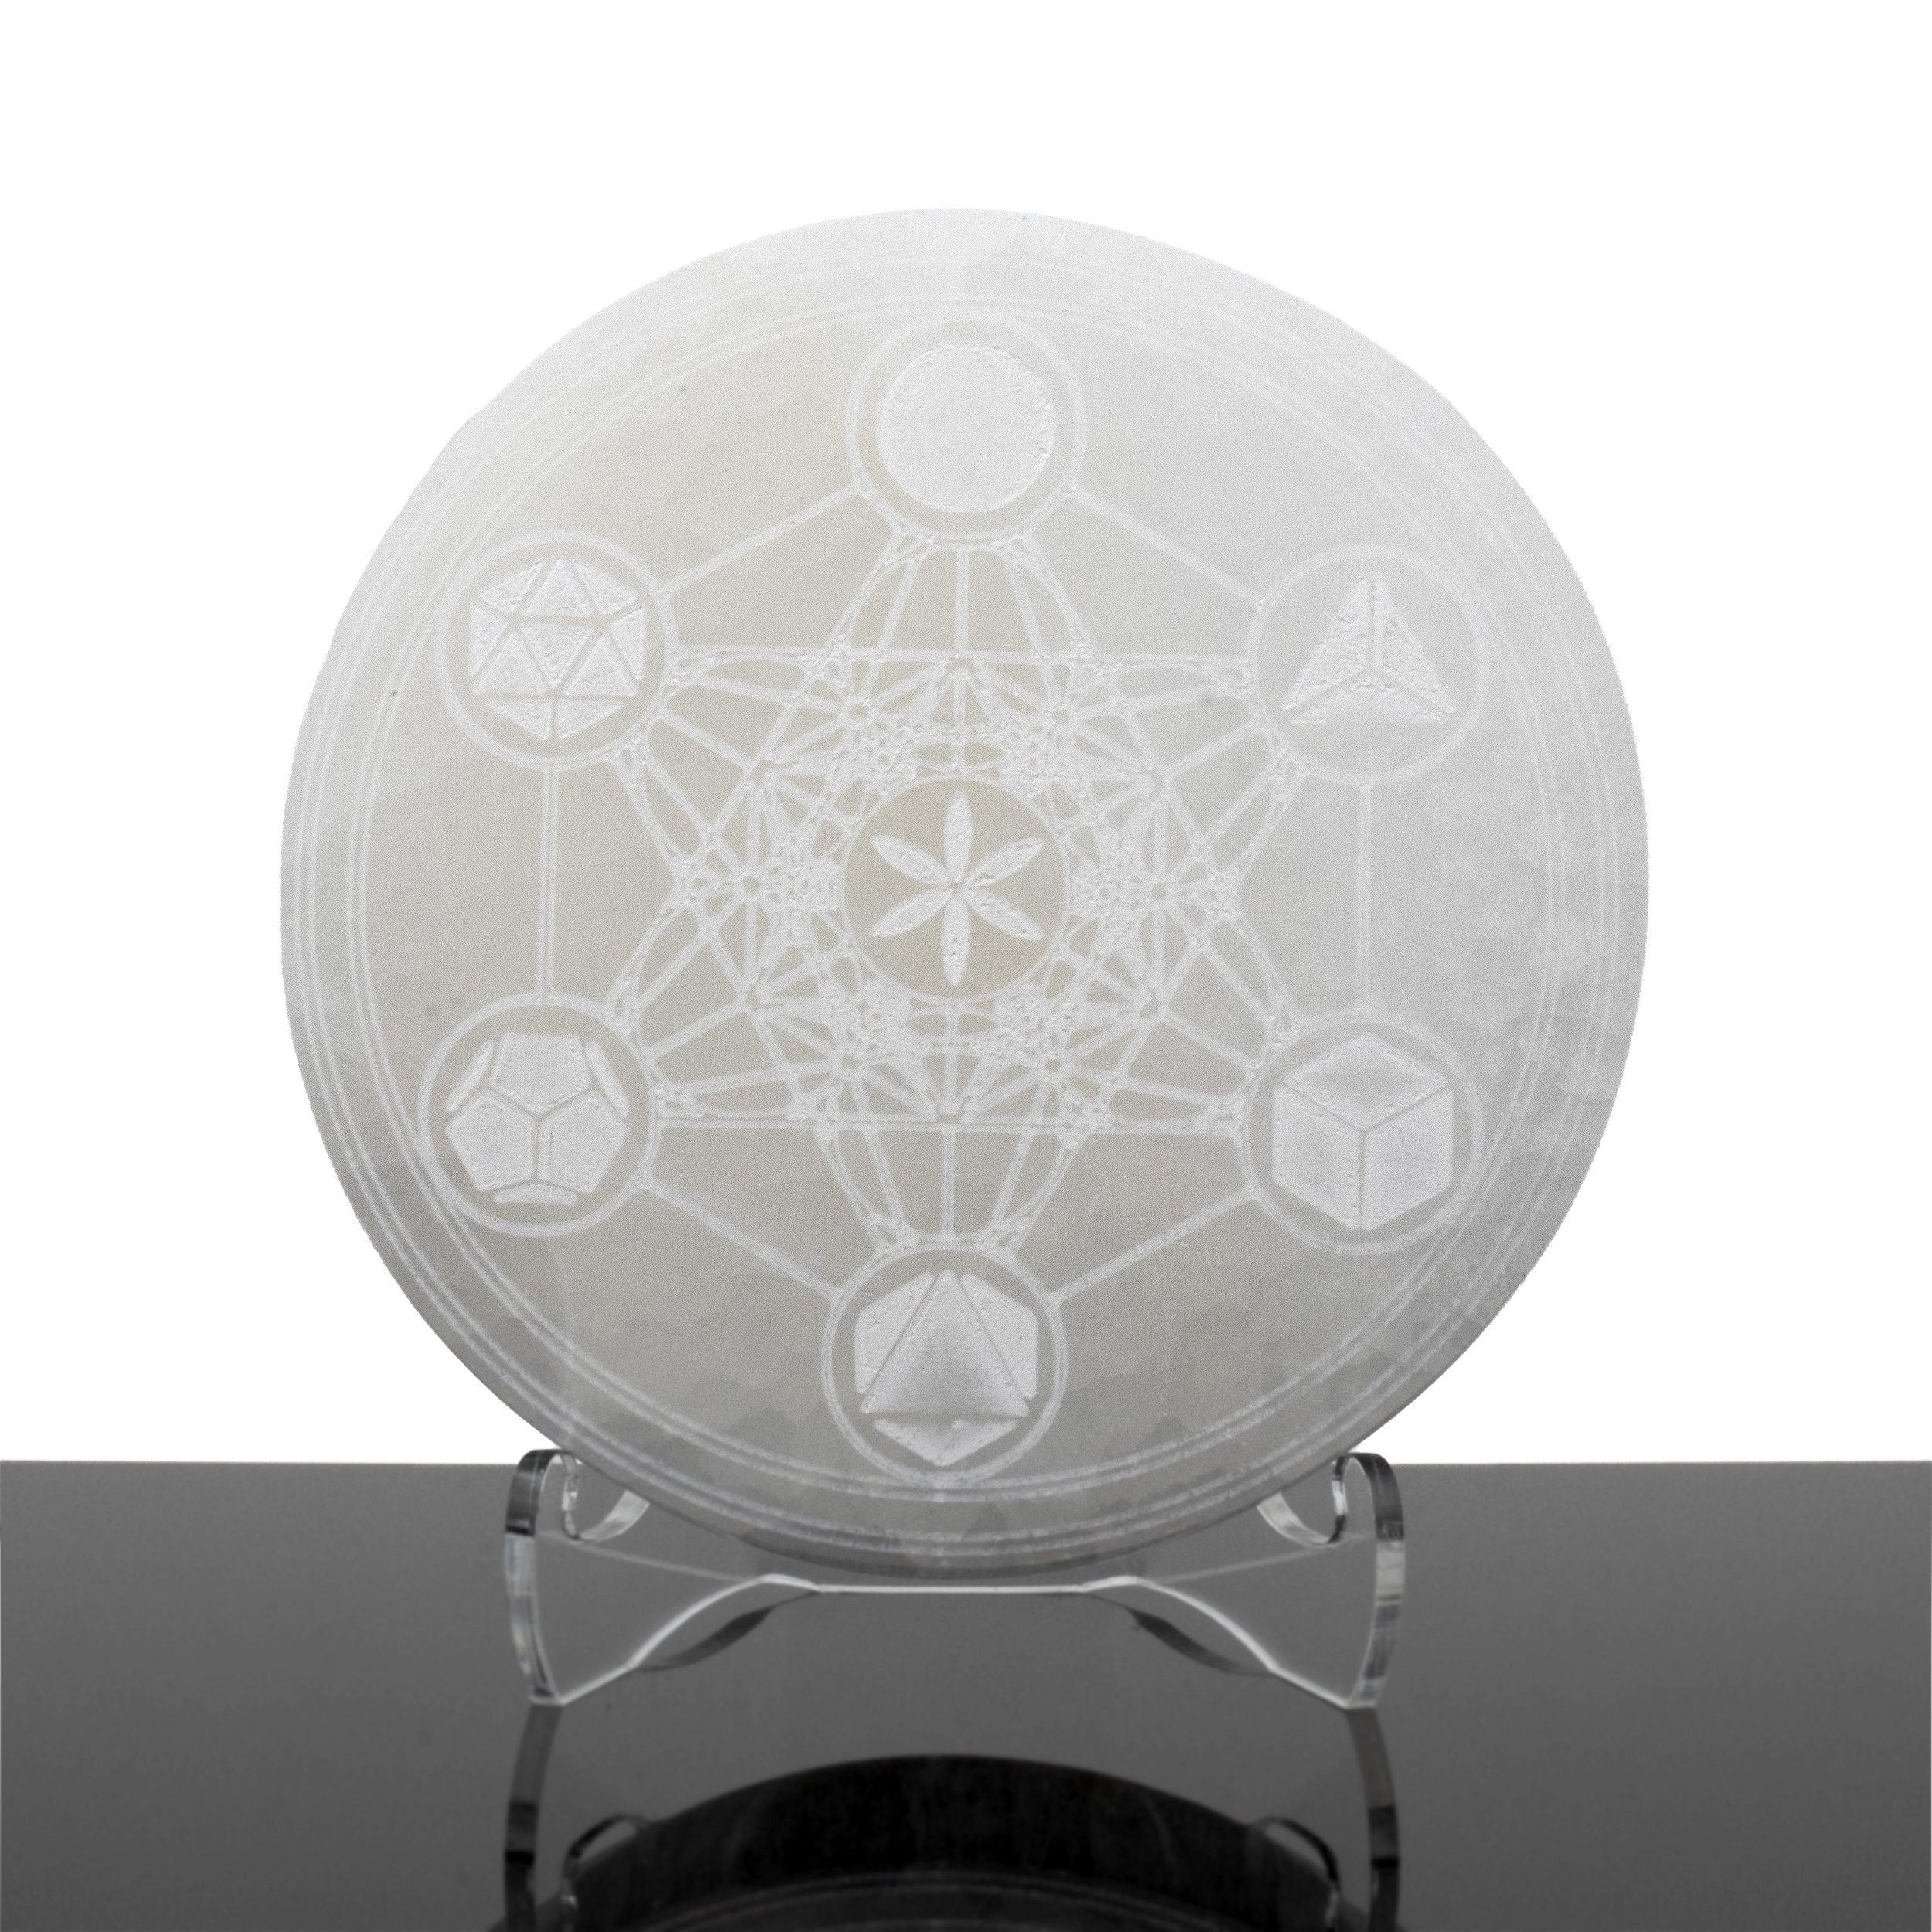 Engraved Selenite Disc - Metatron Cube with Platonic Solids - Sacred Geometry